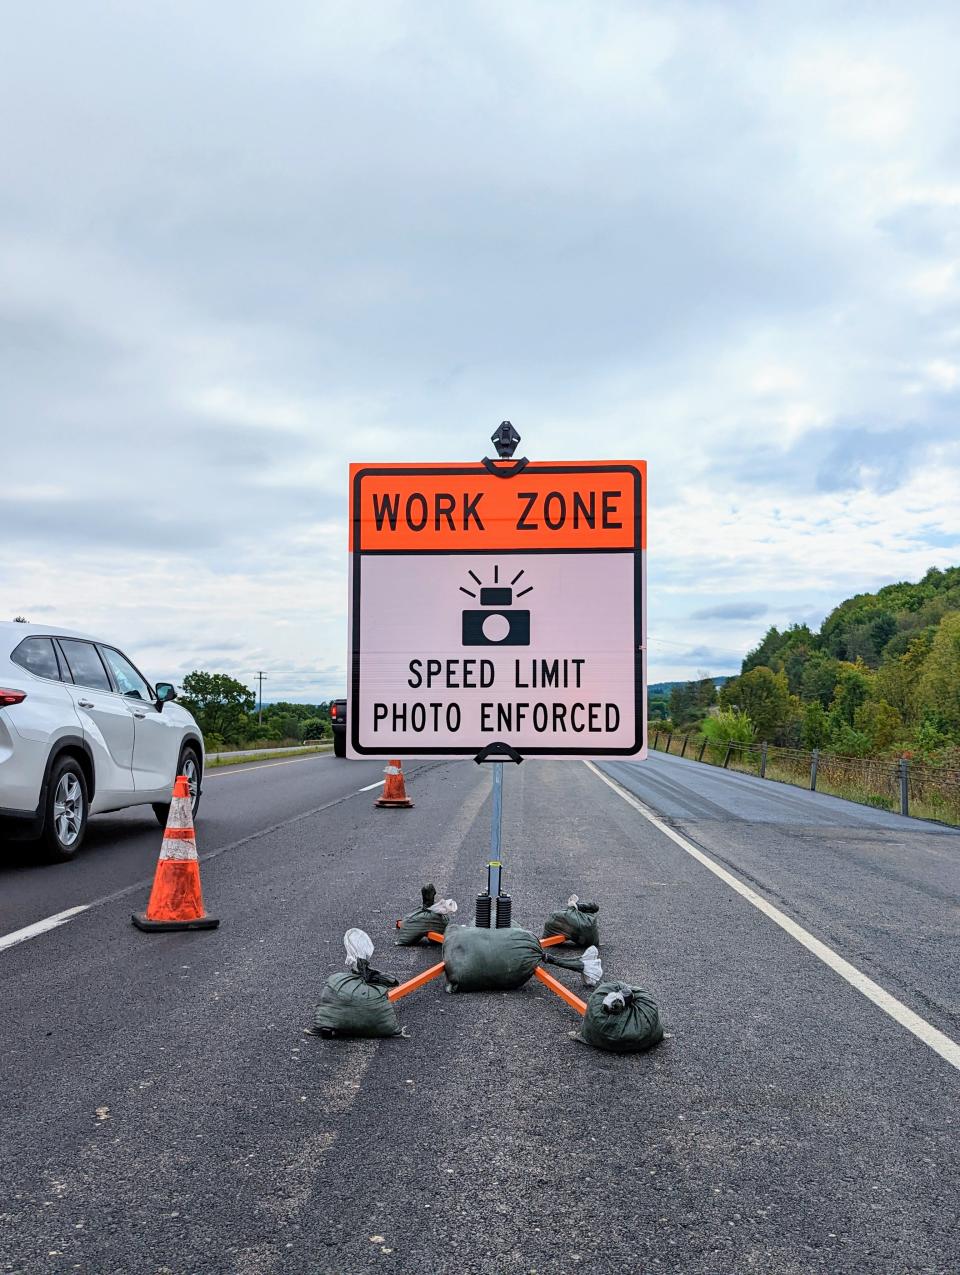 The New York State Department of Transportation and Thruway Authority kickstarted a Work Zone Speed Enforcement program earlier this year to increase highway safety.